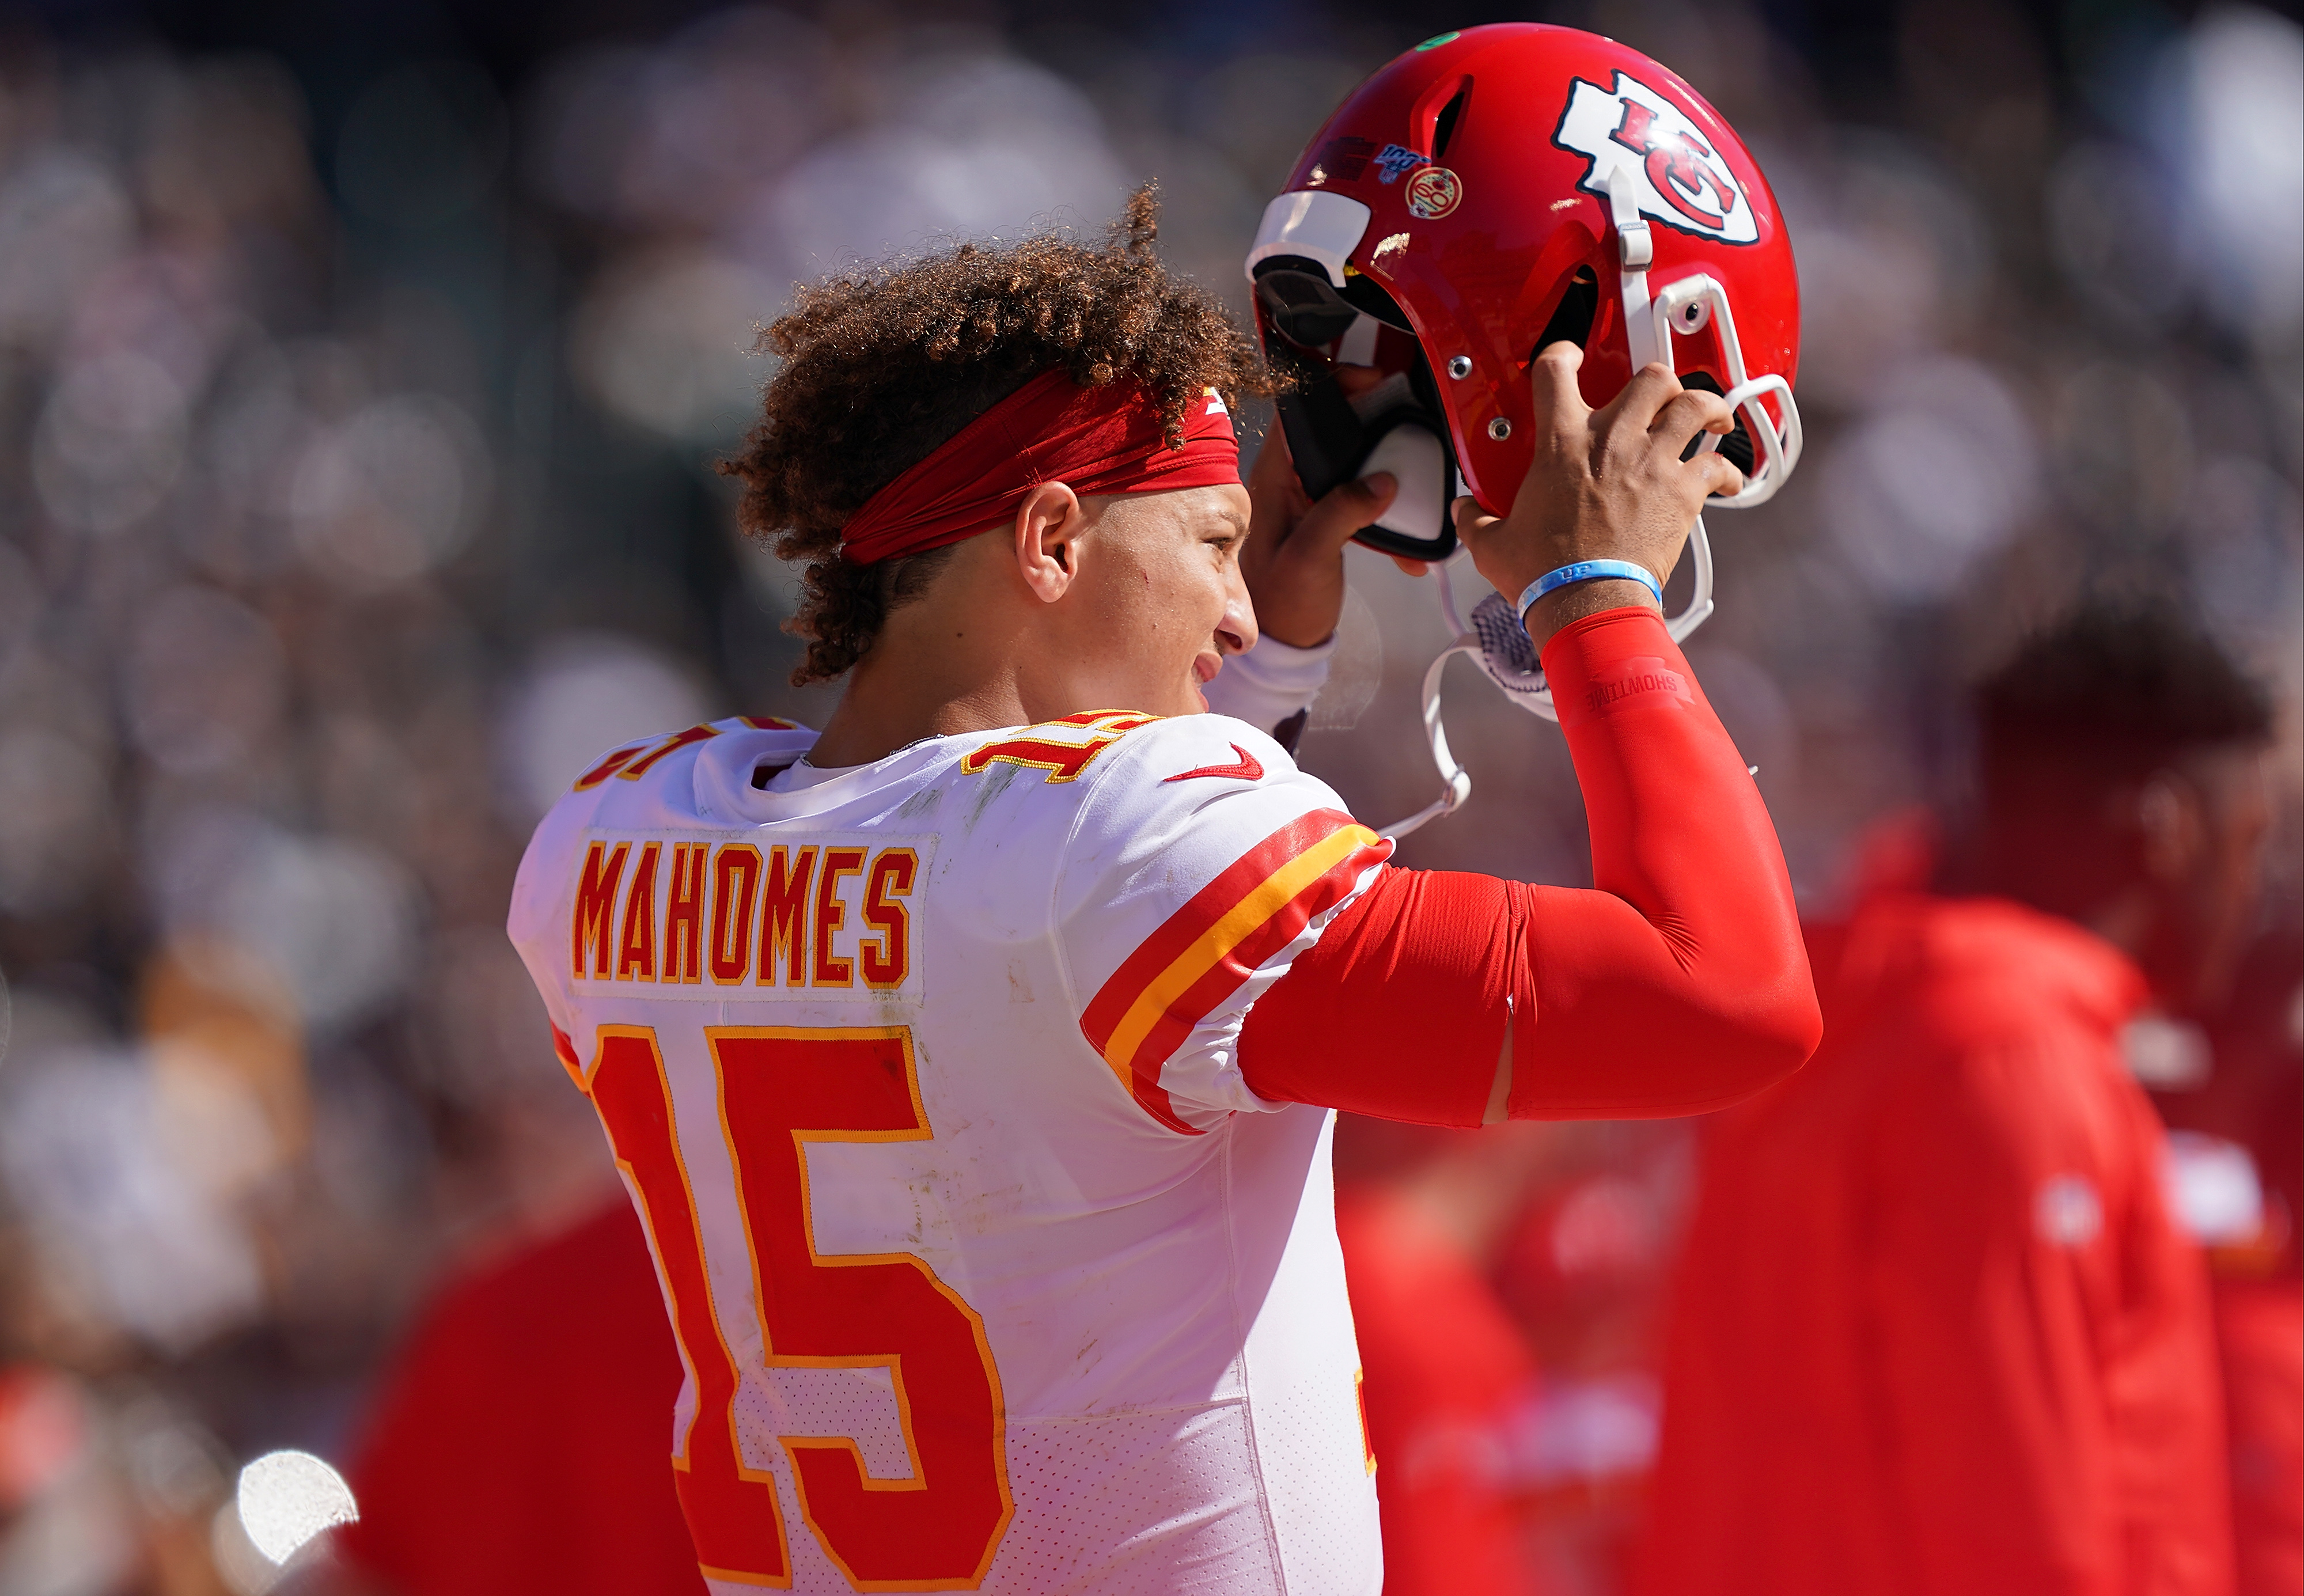 Mahomes' Chiefs jersey on display in Pro Football Hall of Fame